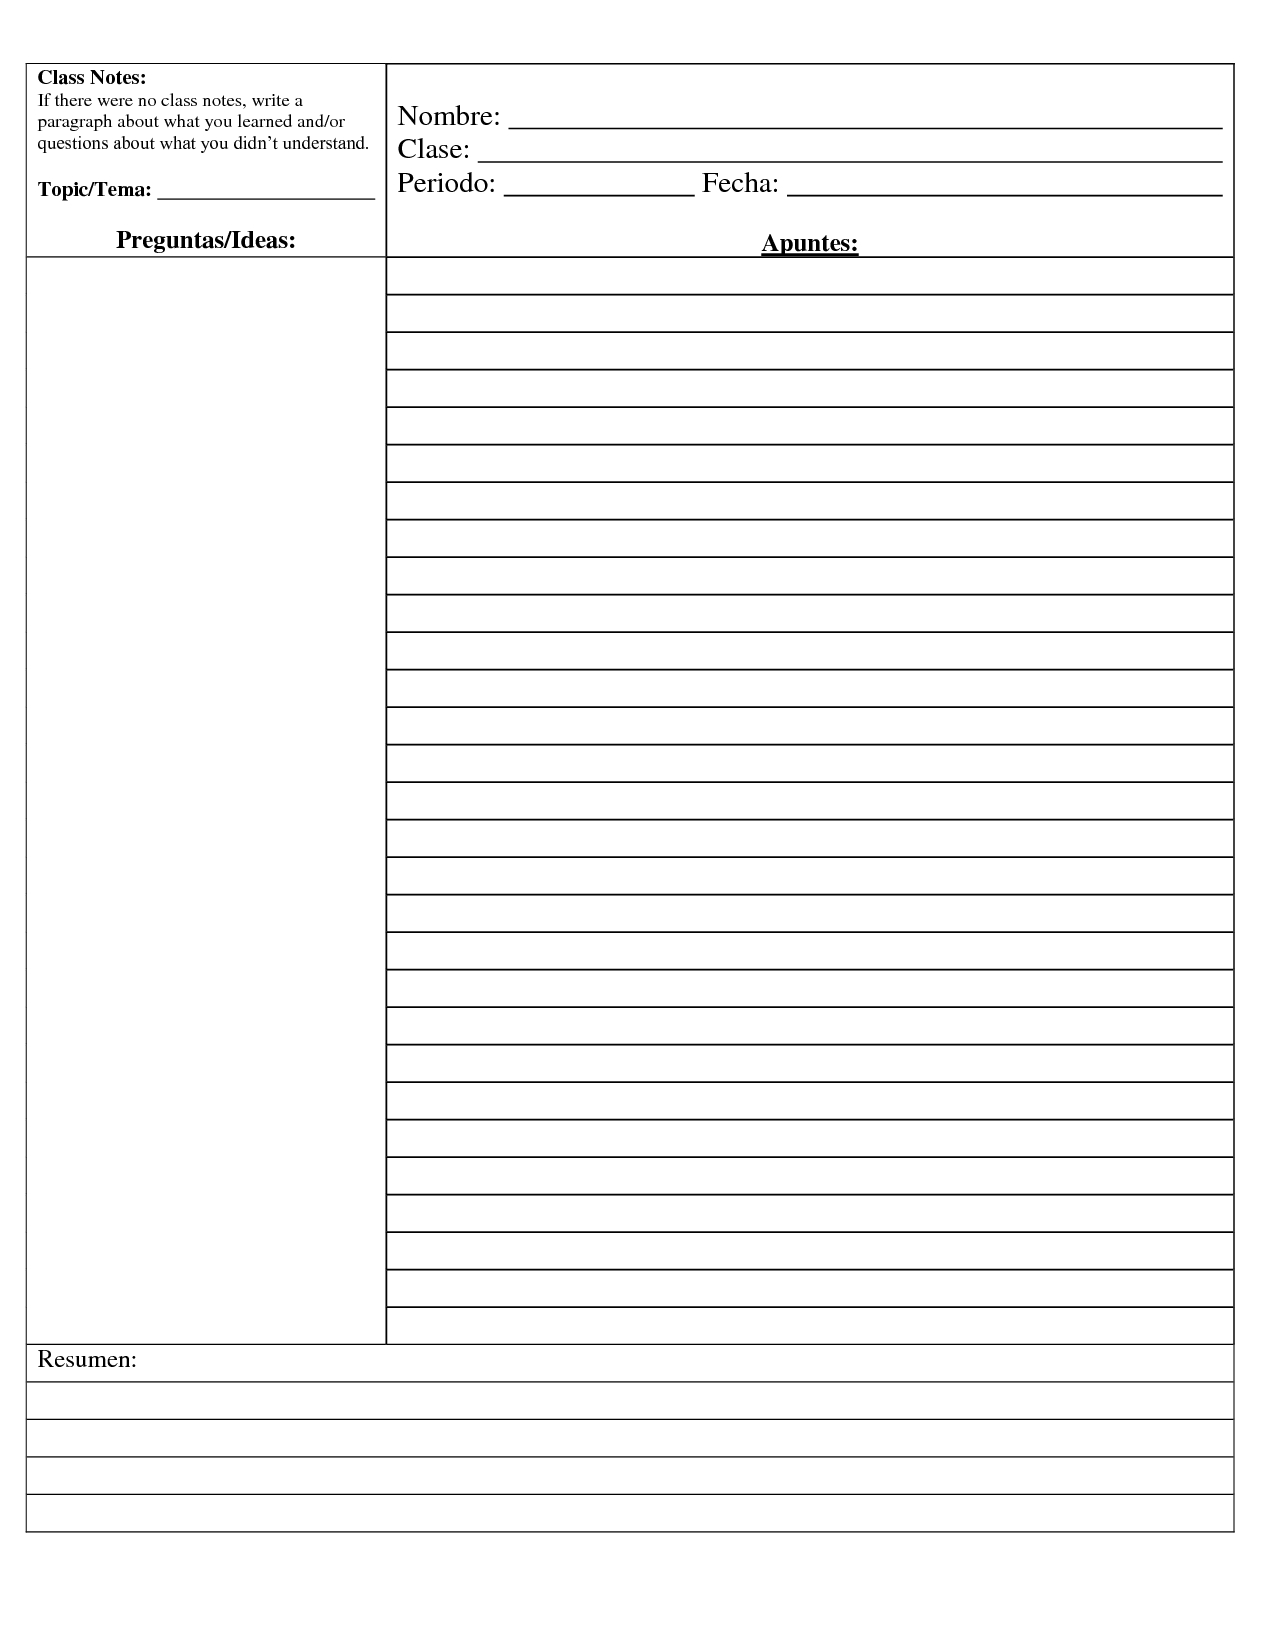 Doc 585734 Cornell Note Template Cornell Notes Best Cornell Intended For Cornell Notes Template Doc